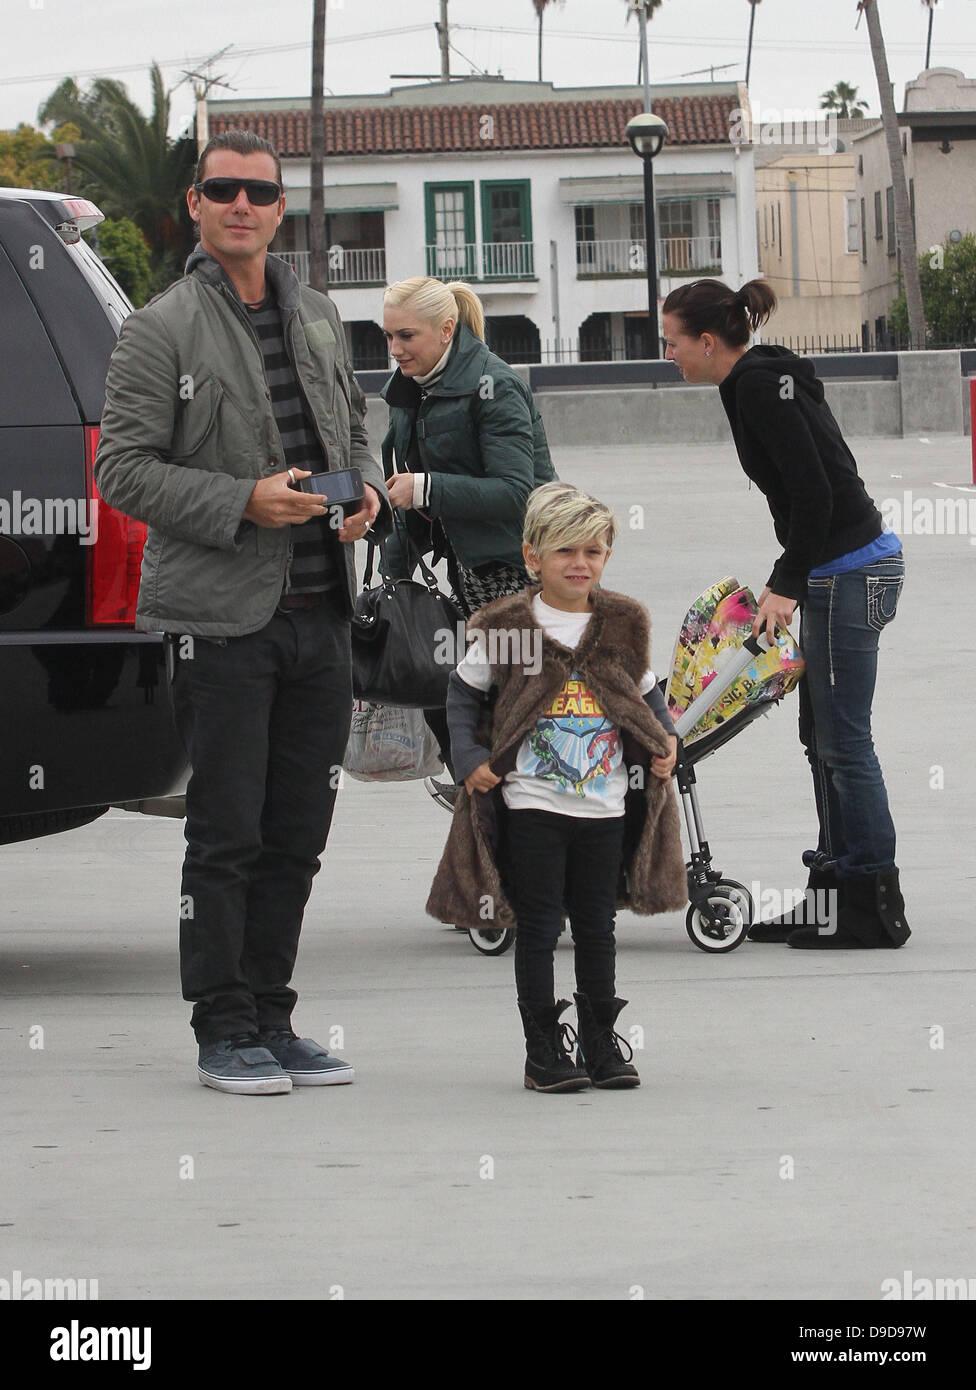 Gwen Stefani, husband Gavin Rossdale and son Kingston Rossdale visiting the Science Centre at Exposition Park Los Angeles, California - 26.03.11 Stock Photo